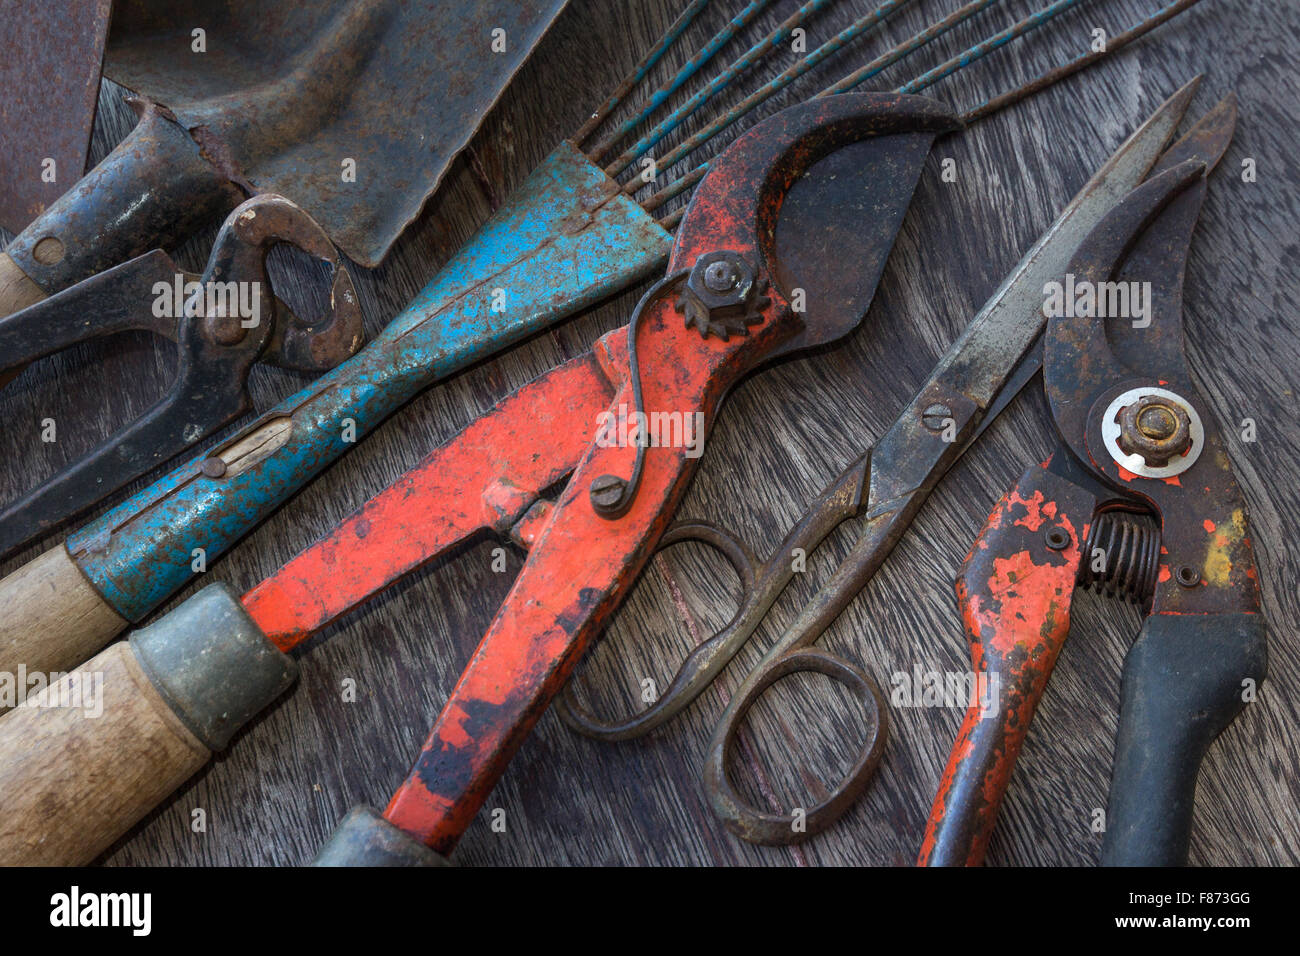 Old rusty tools - dirty tools - vintage garden tools on wooden background Stock Photo